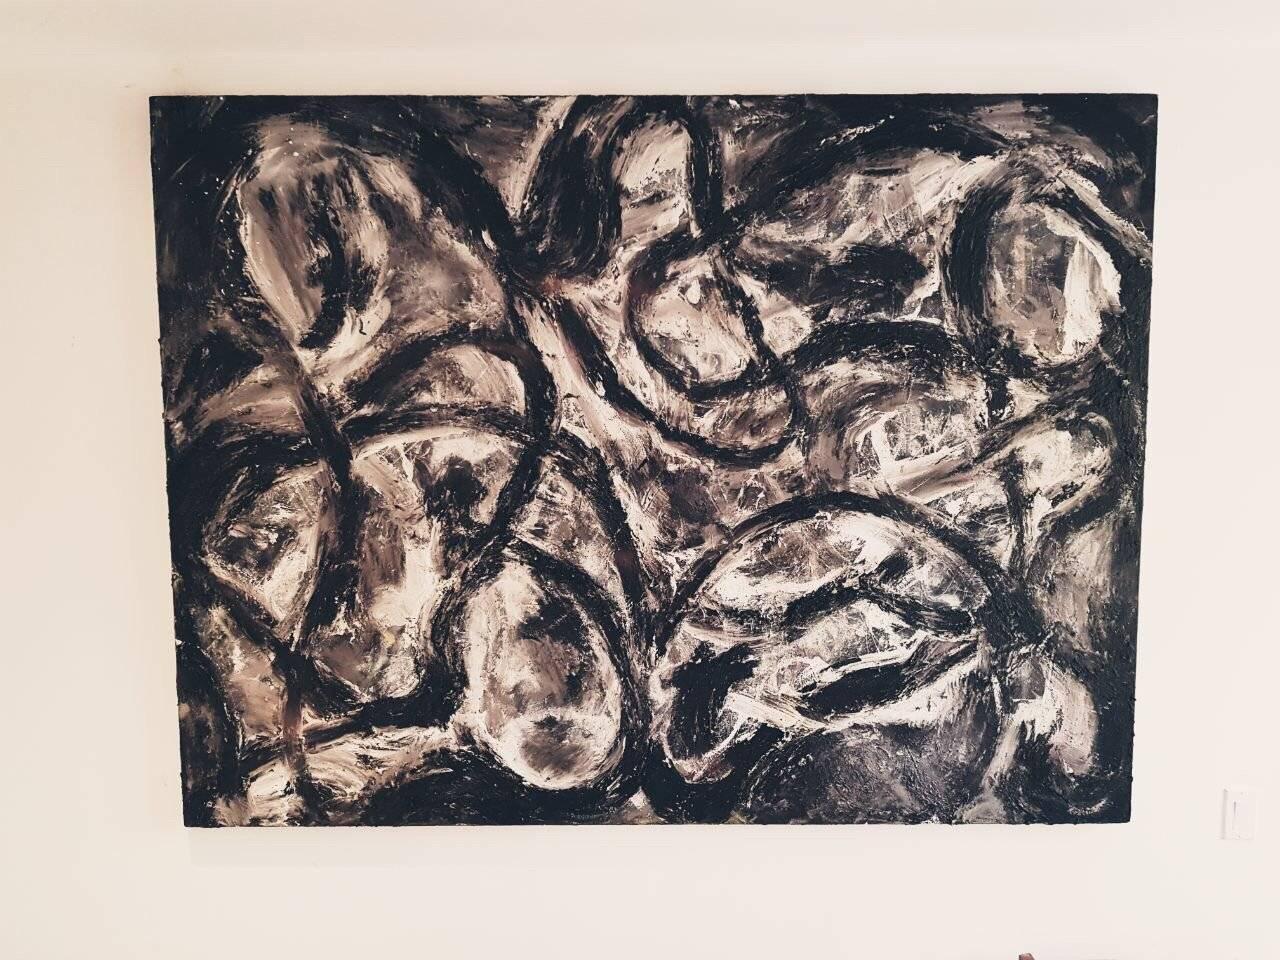 Movement Mixed Media Painting Oil on Linen Abstract Expressionism Black & White 1